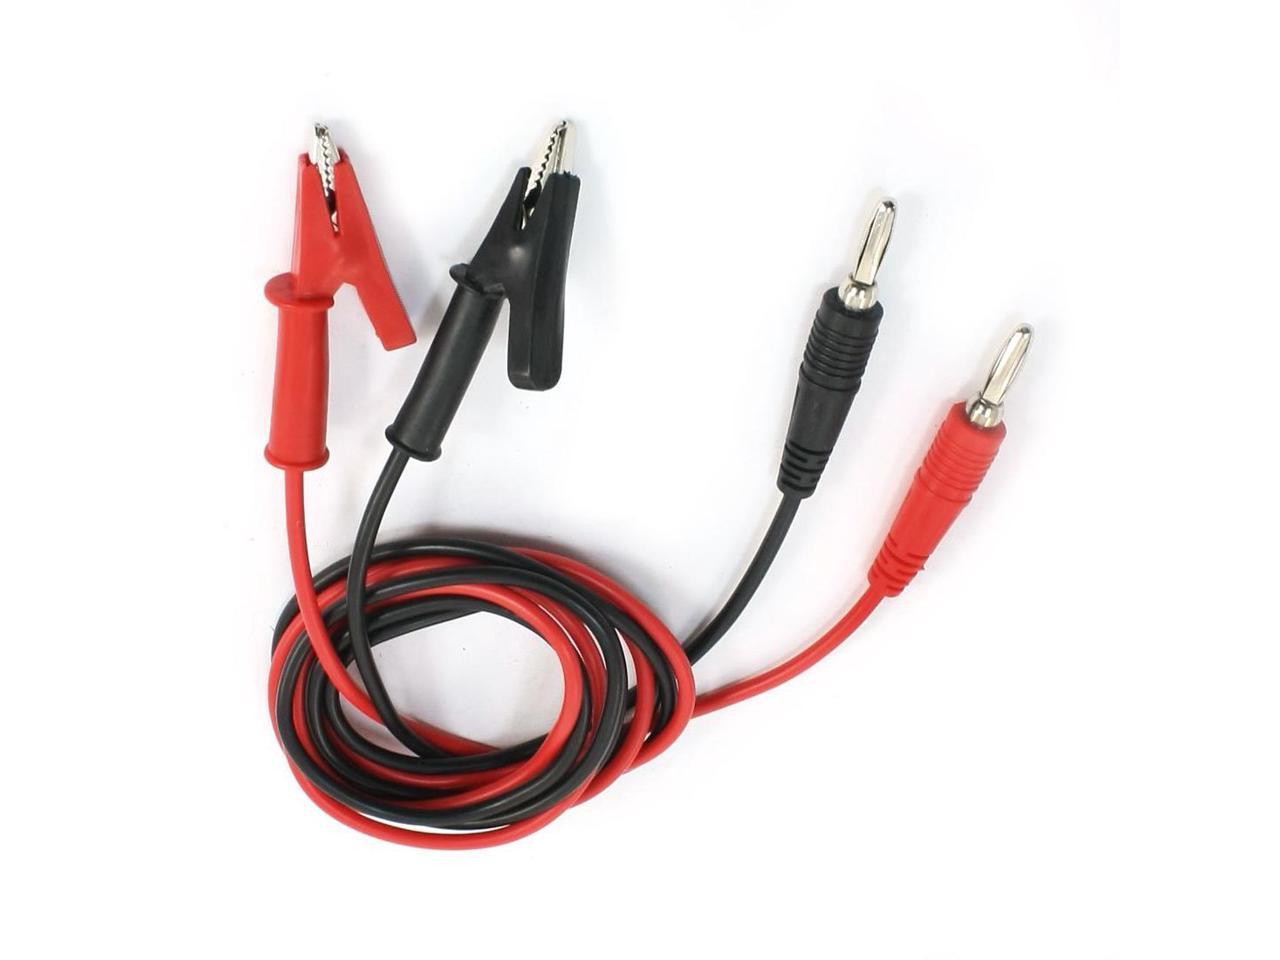 Alligator Clip to Banana Plug Test Cable Pair for Multimeter 1M Long HOT